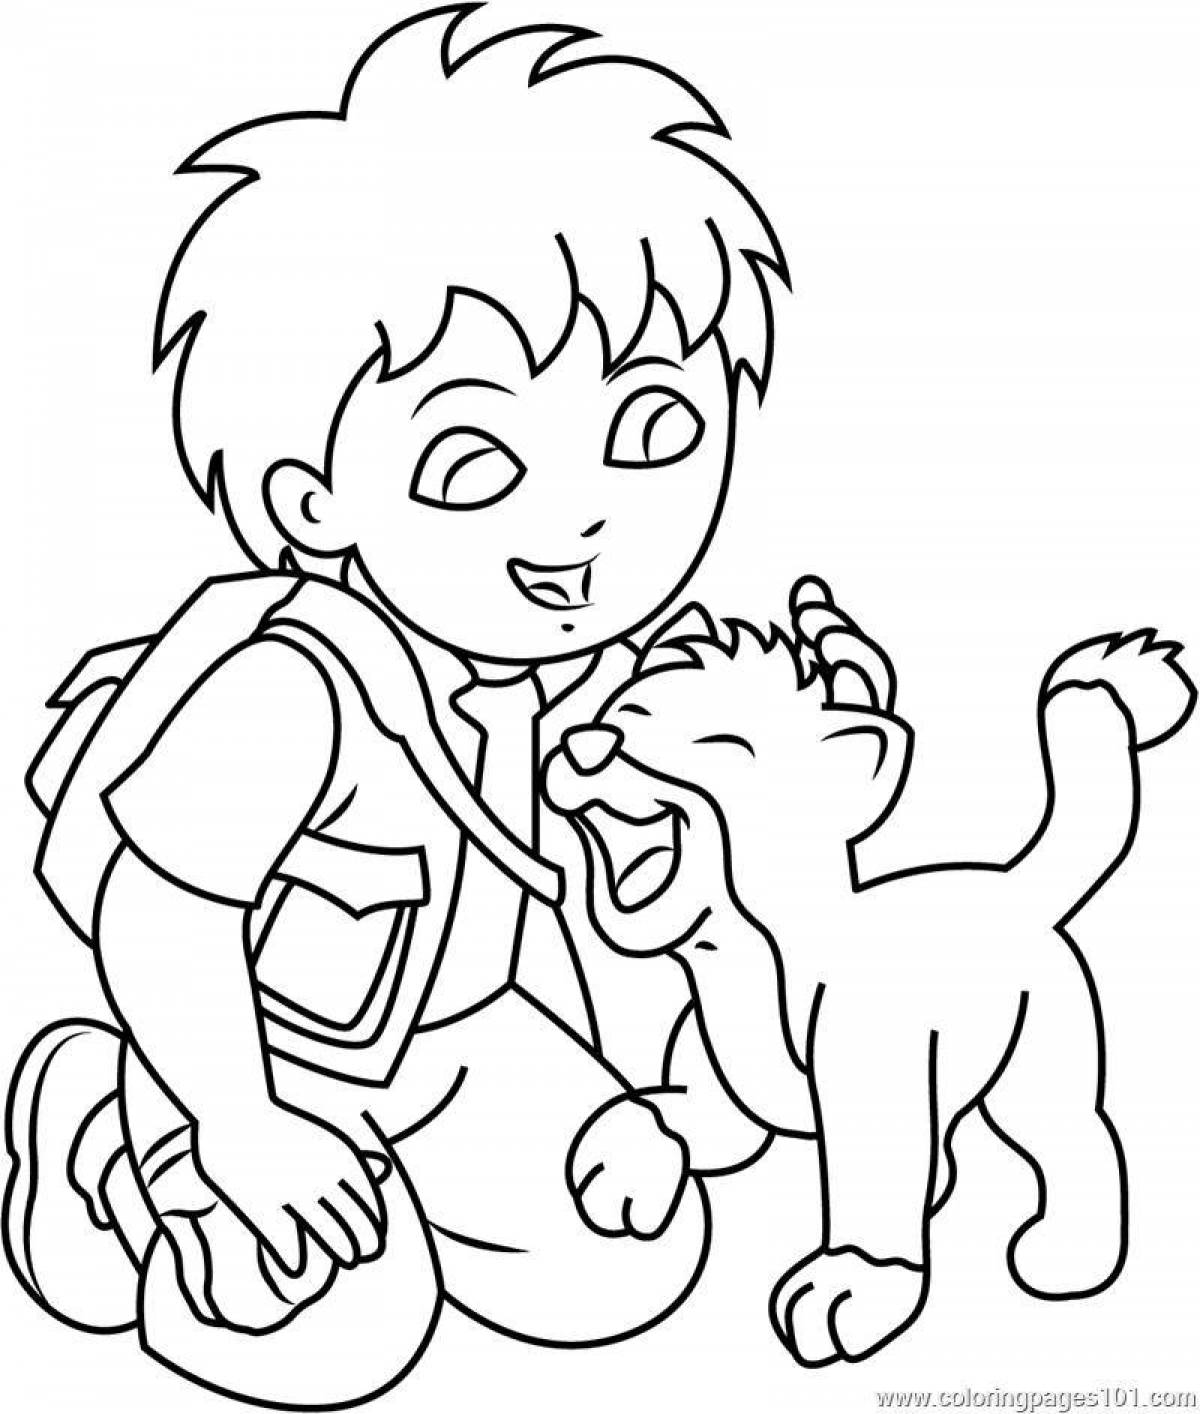 Diego go coloring page